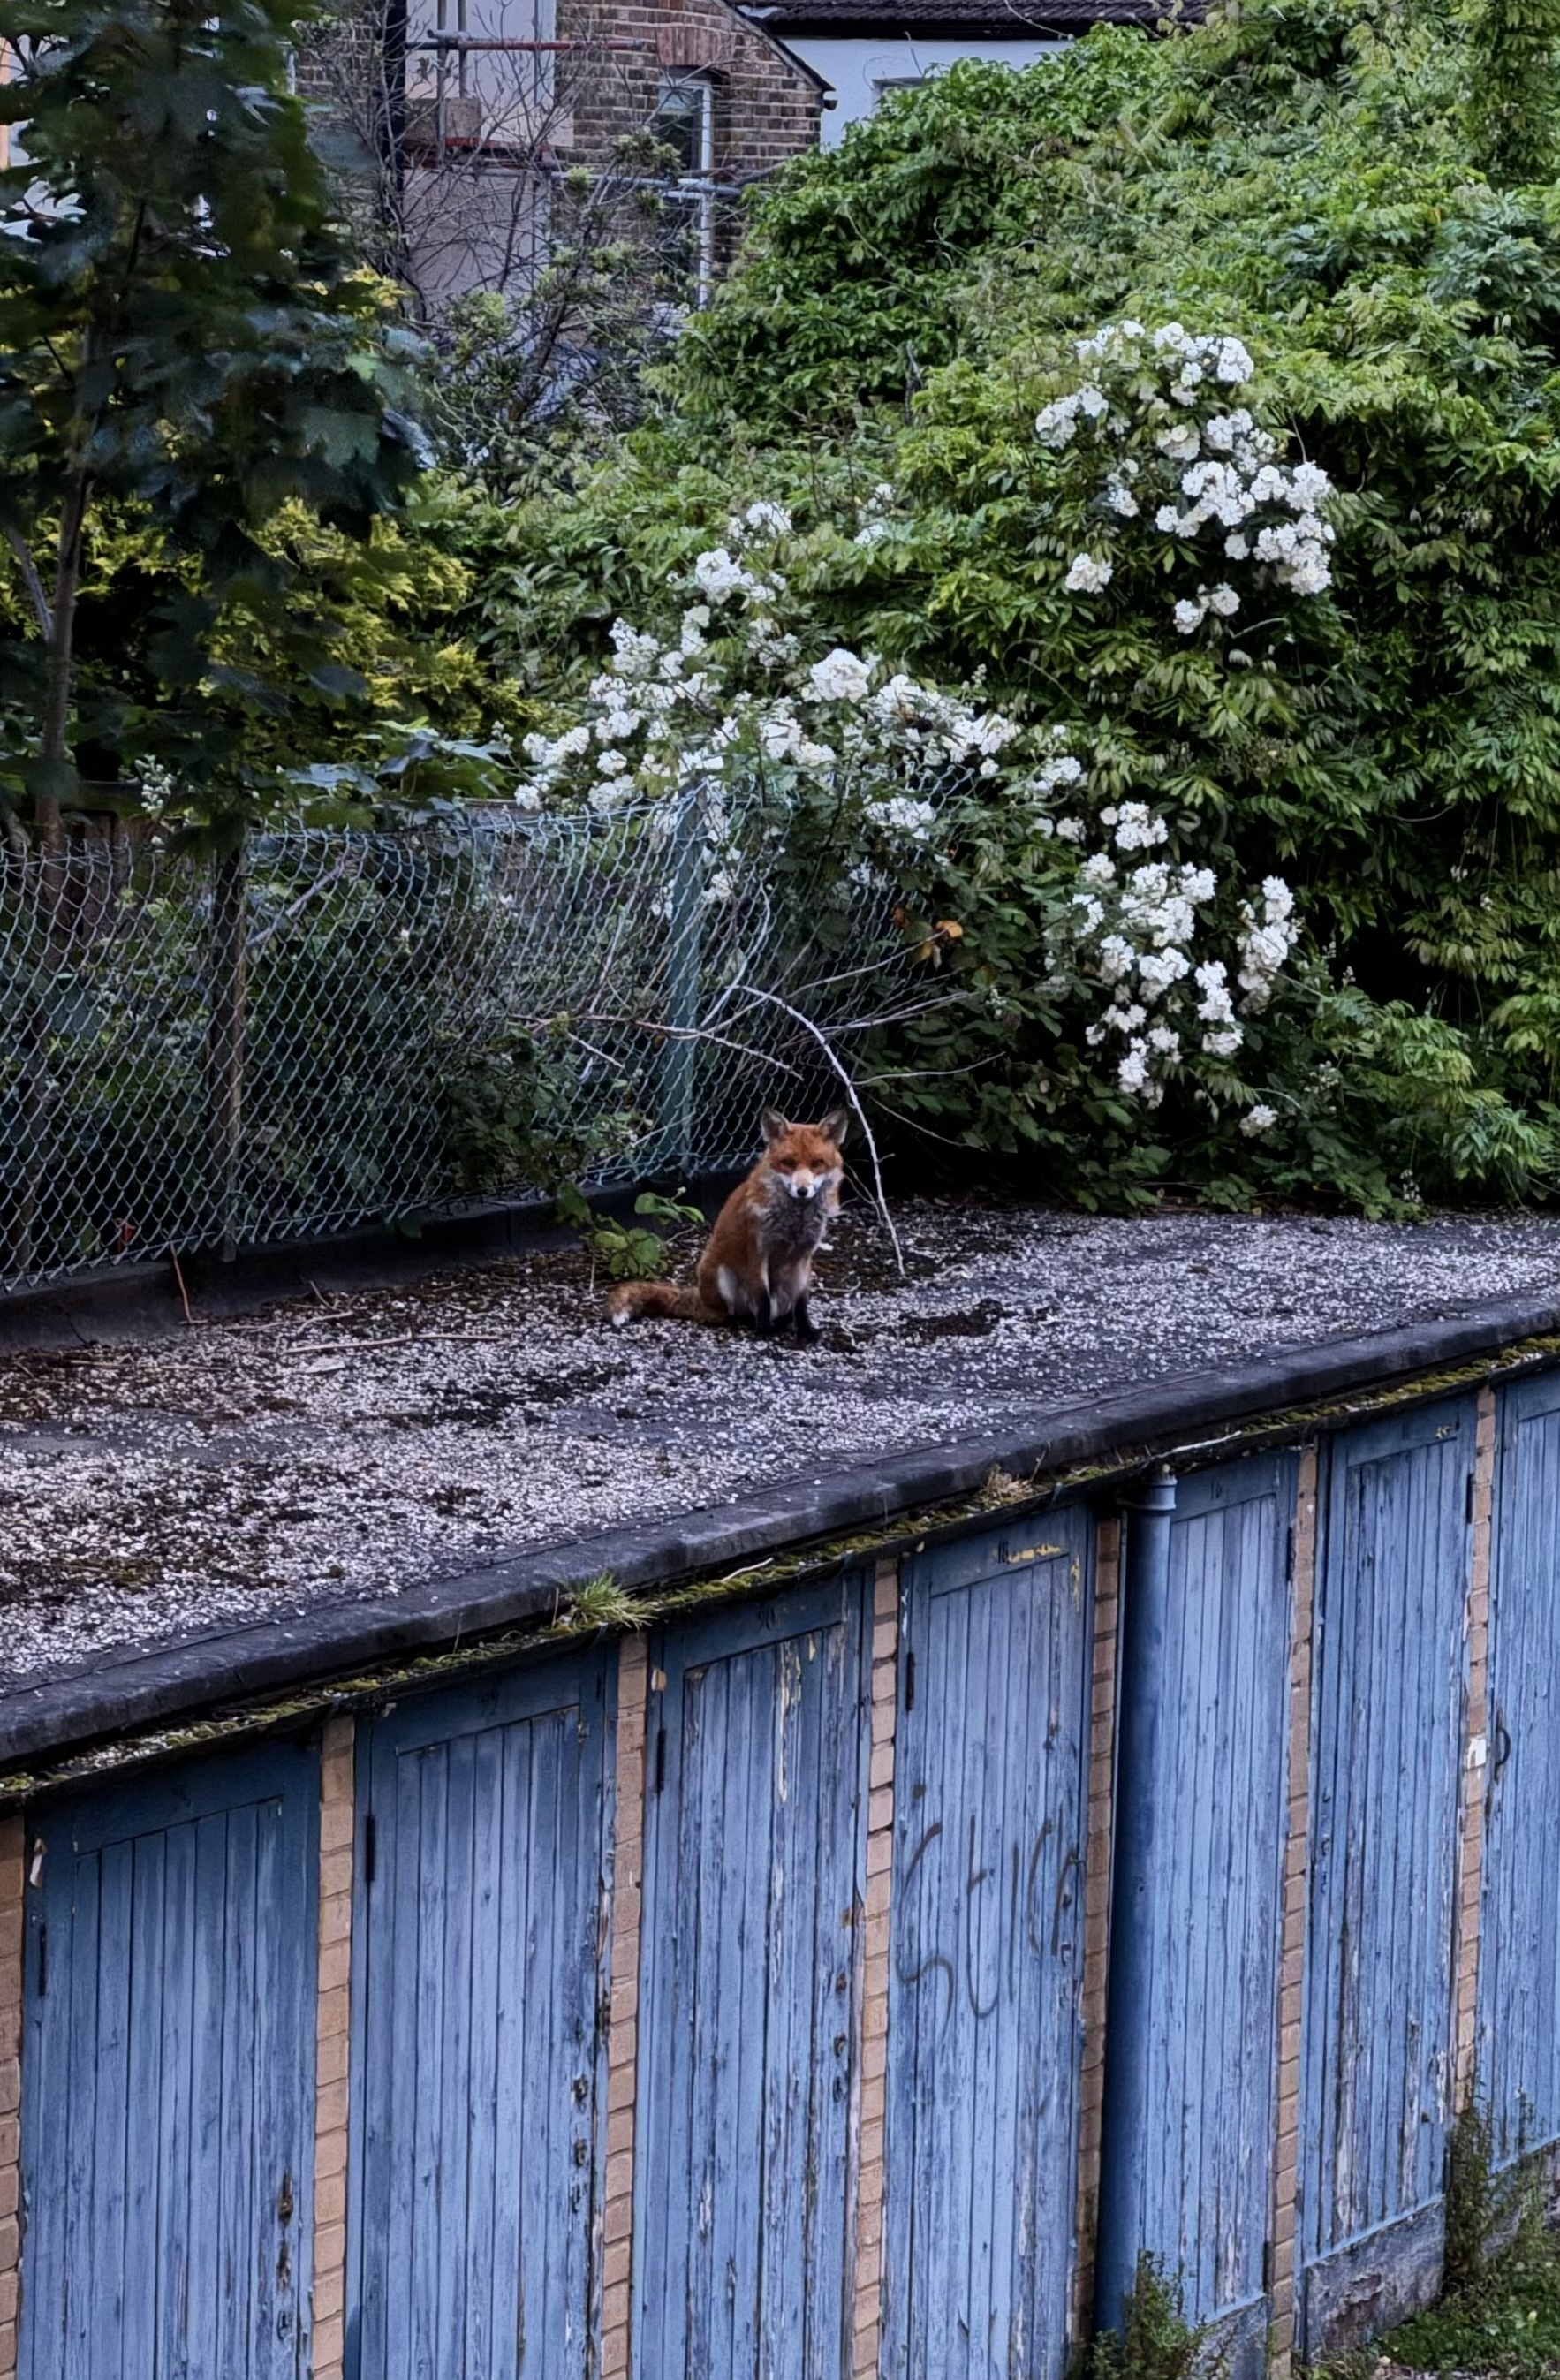 A fox resting on top of a row of sheds with blue doors.